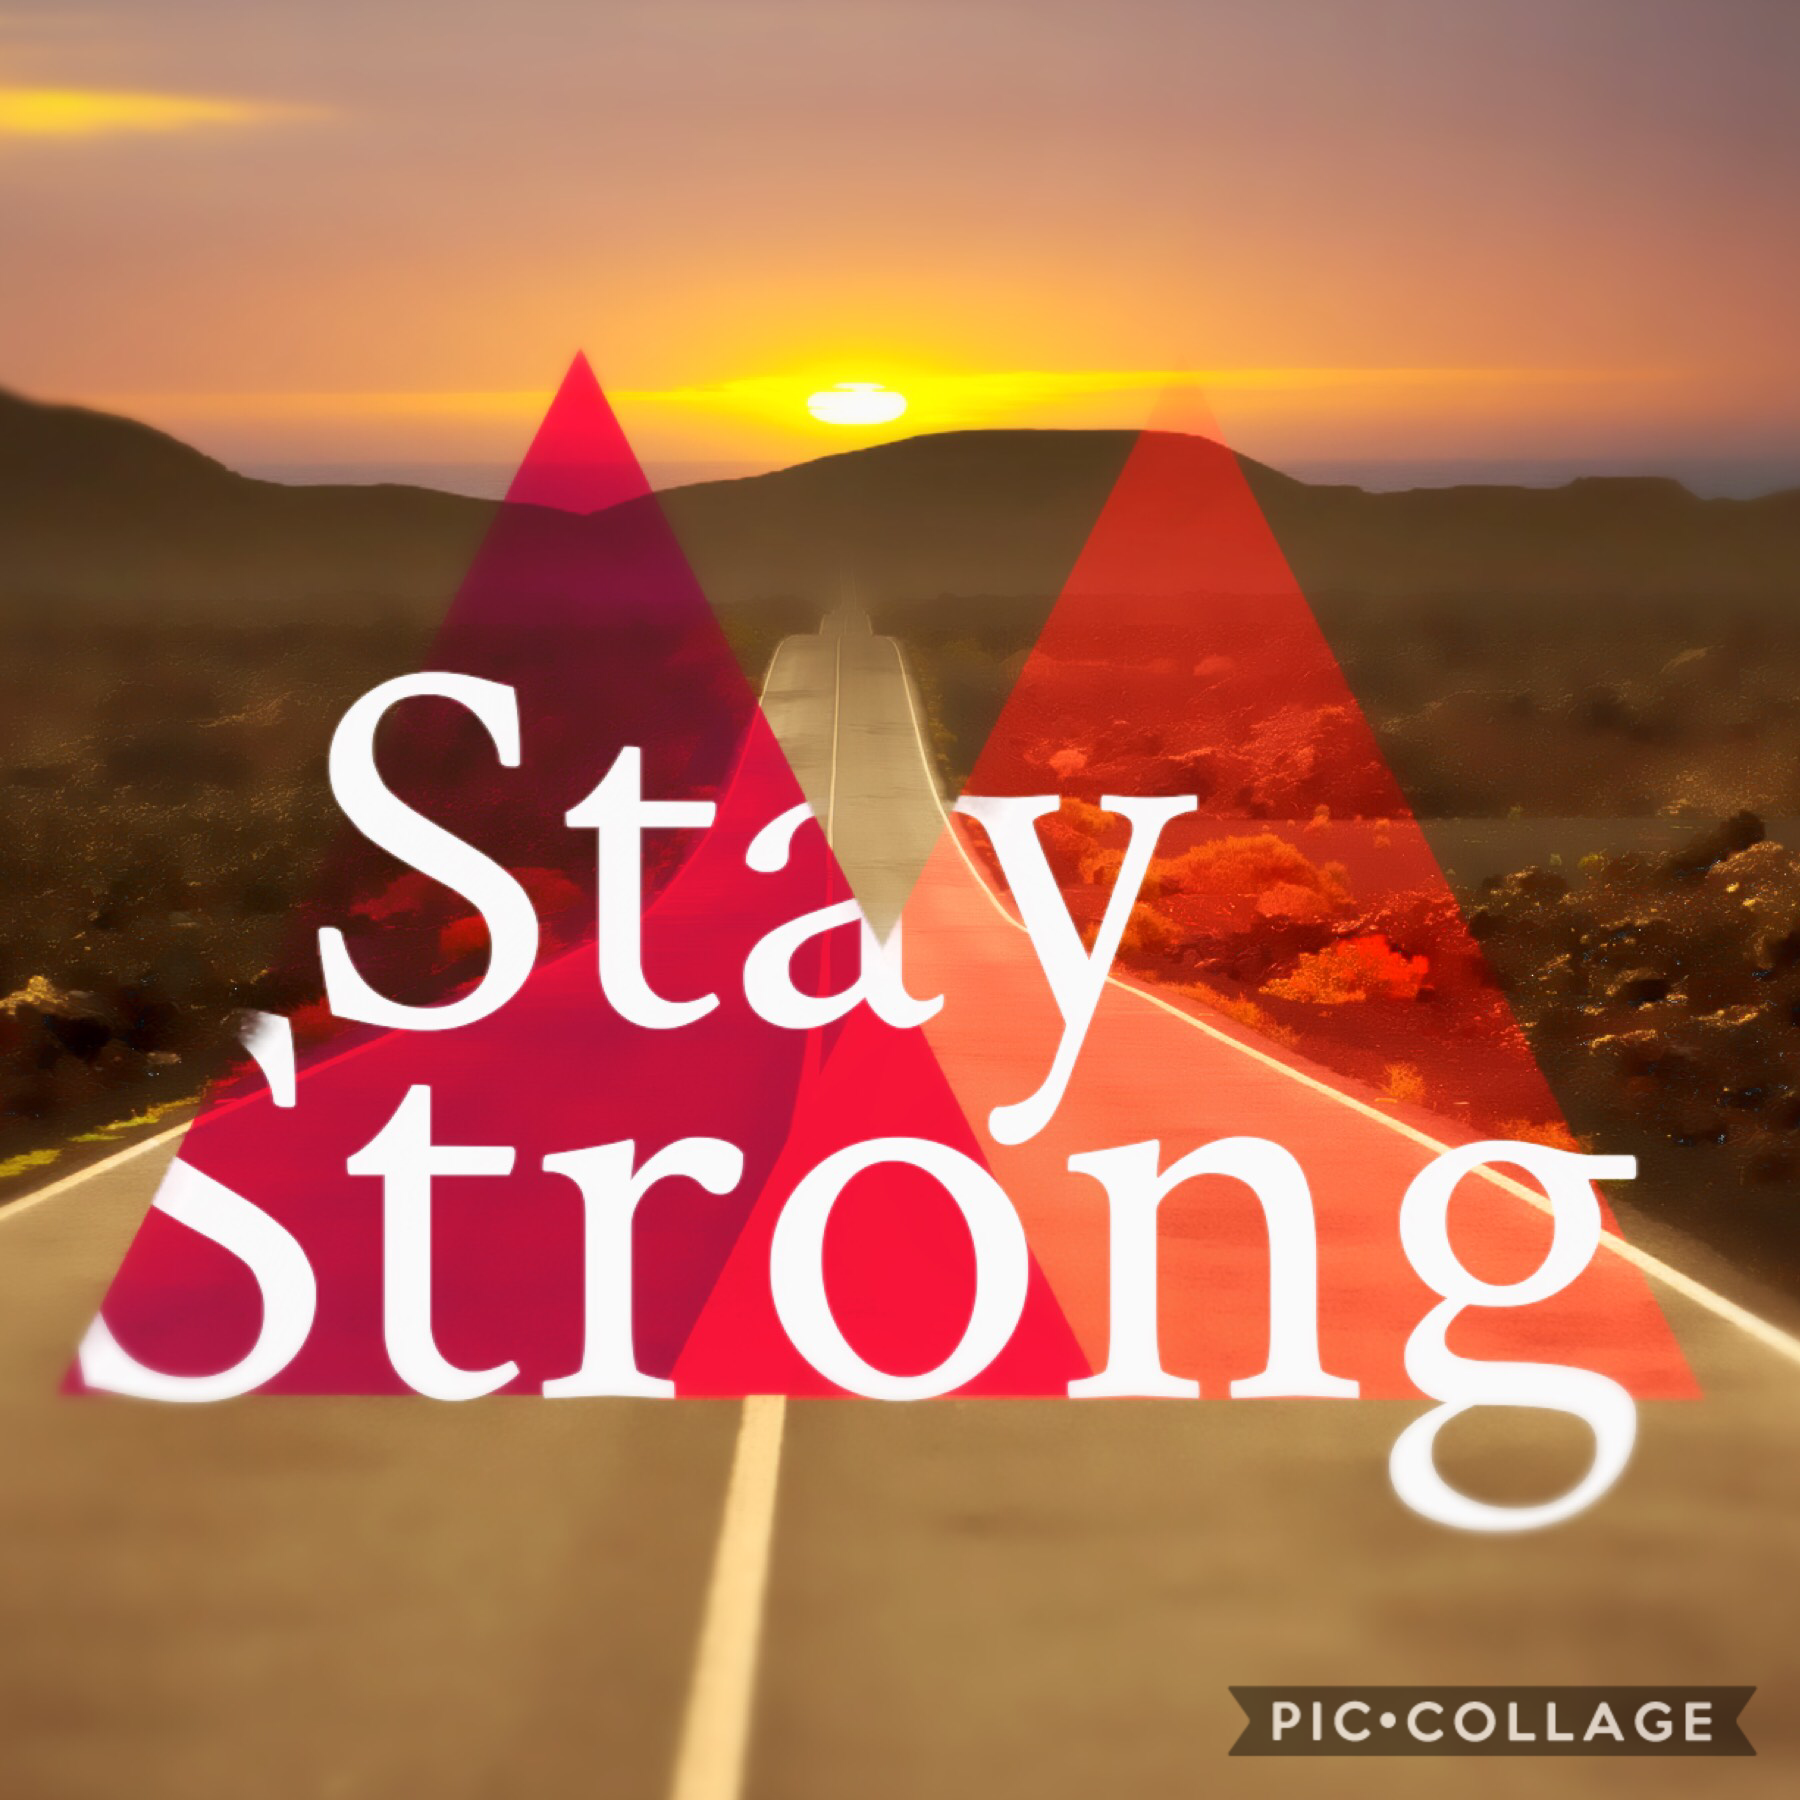 Stay strong!Life WILL get better!srry I haven’t posted guys I’ve been super busy I’m gonna try an start working on the prizes